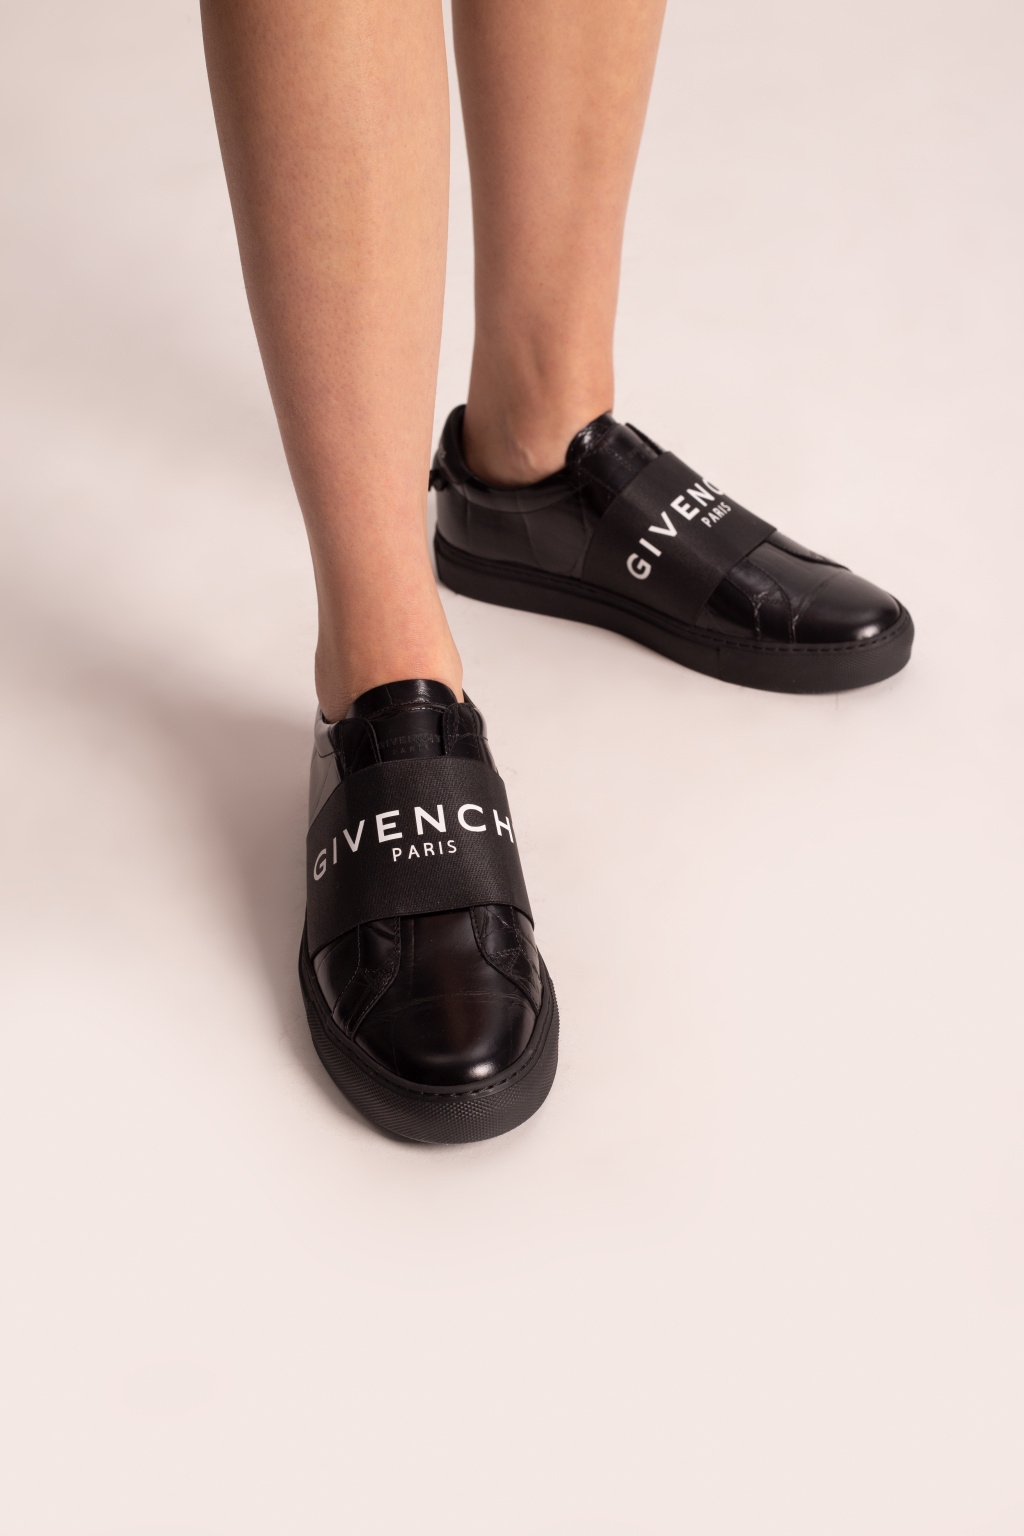 givenchy short-sleeve ‘Urban Street’ sneakers with logo